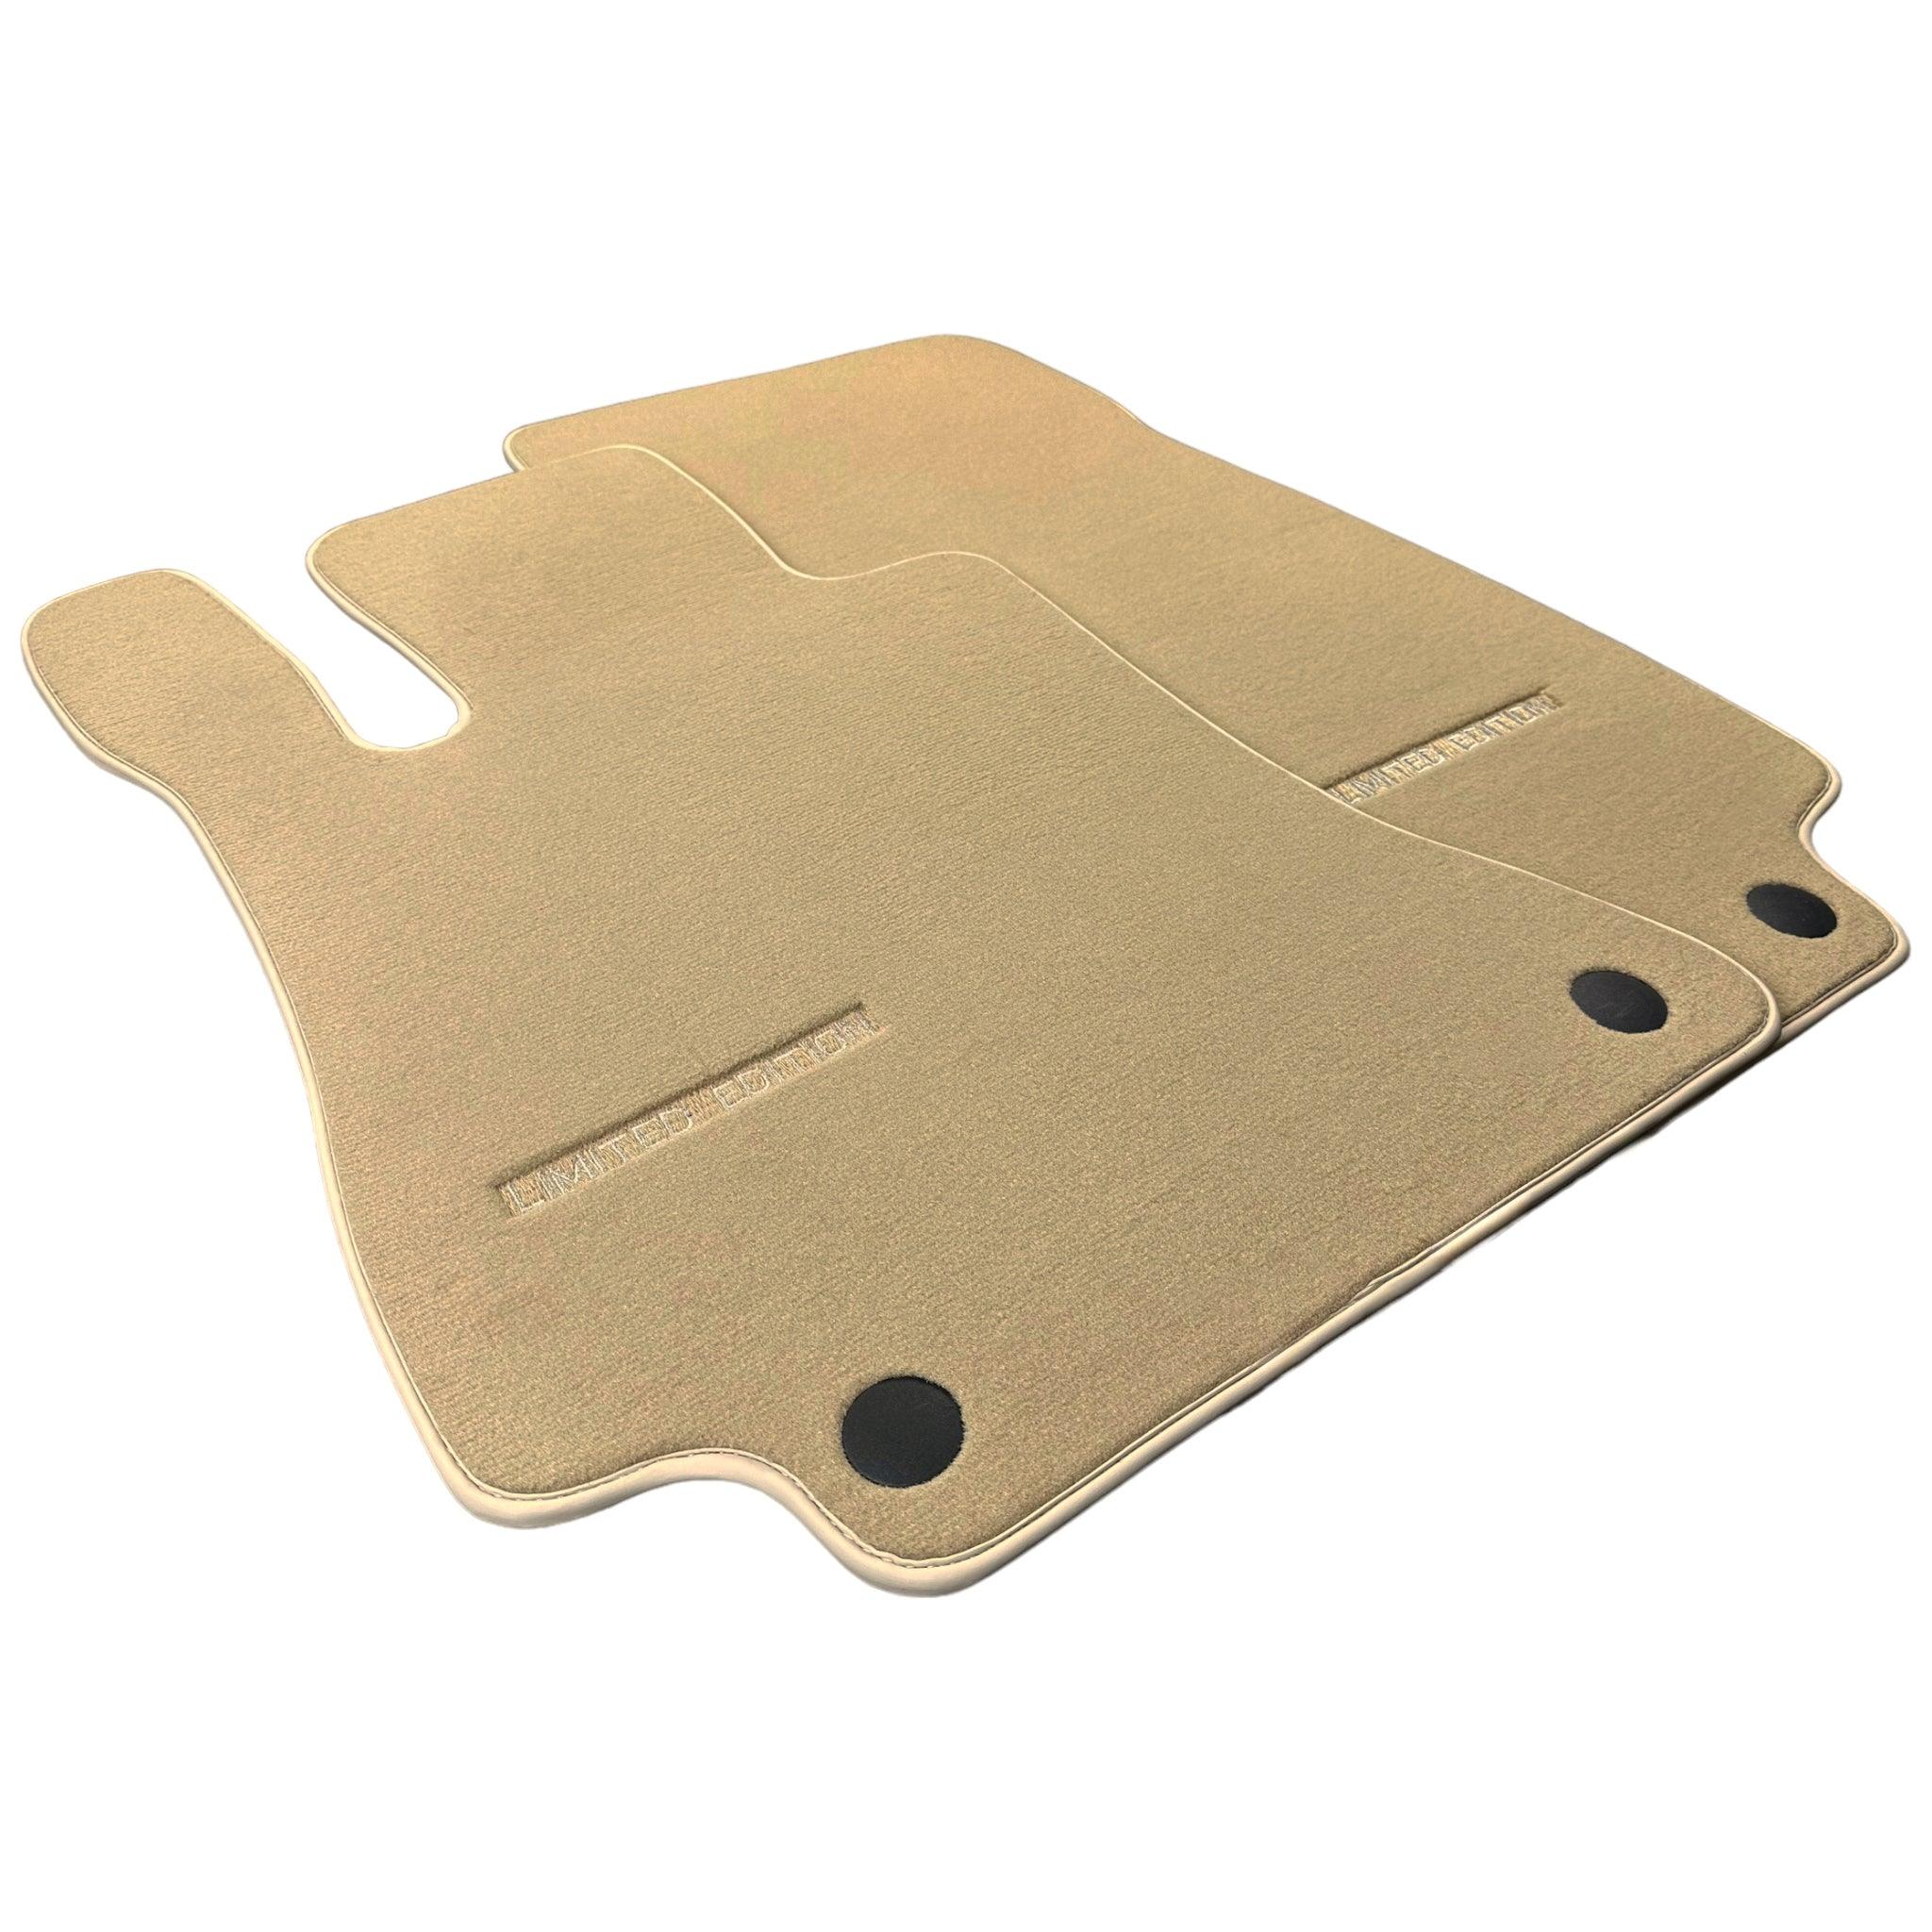 Beige Floor Mats For Mercedes Benz S-Class Z223 Maybach (2021-2023) | Limited Edition